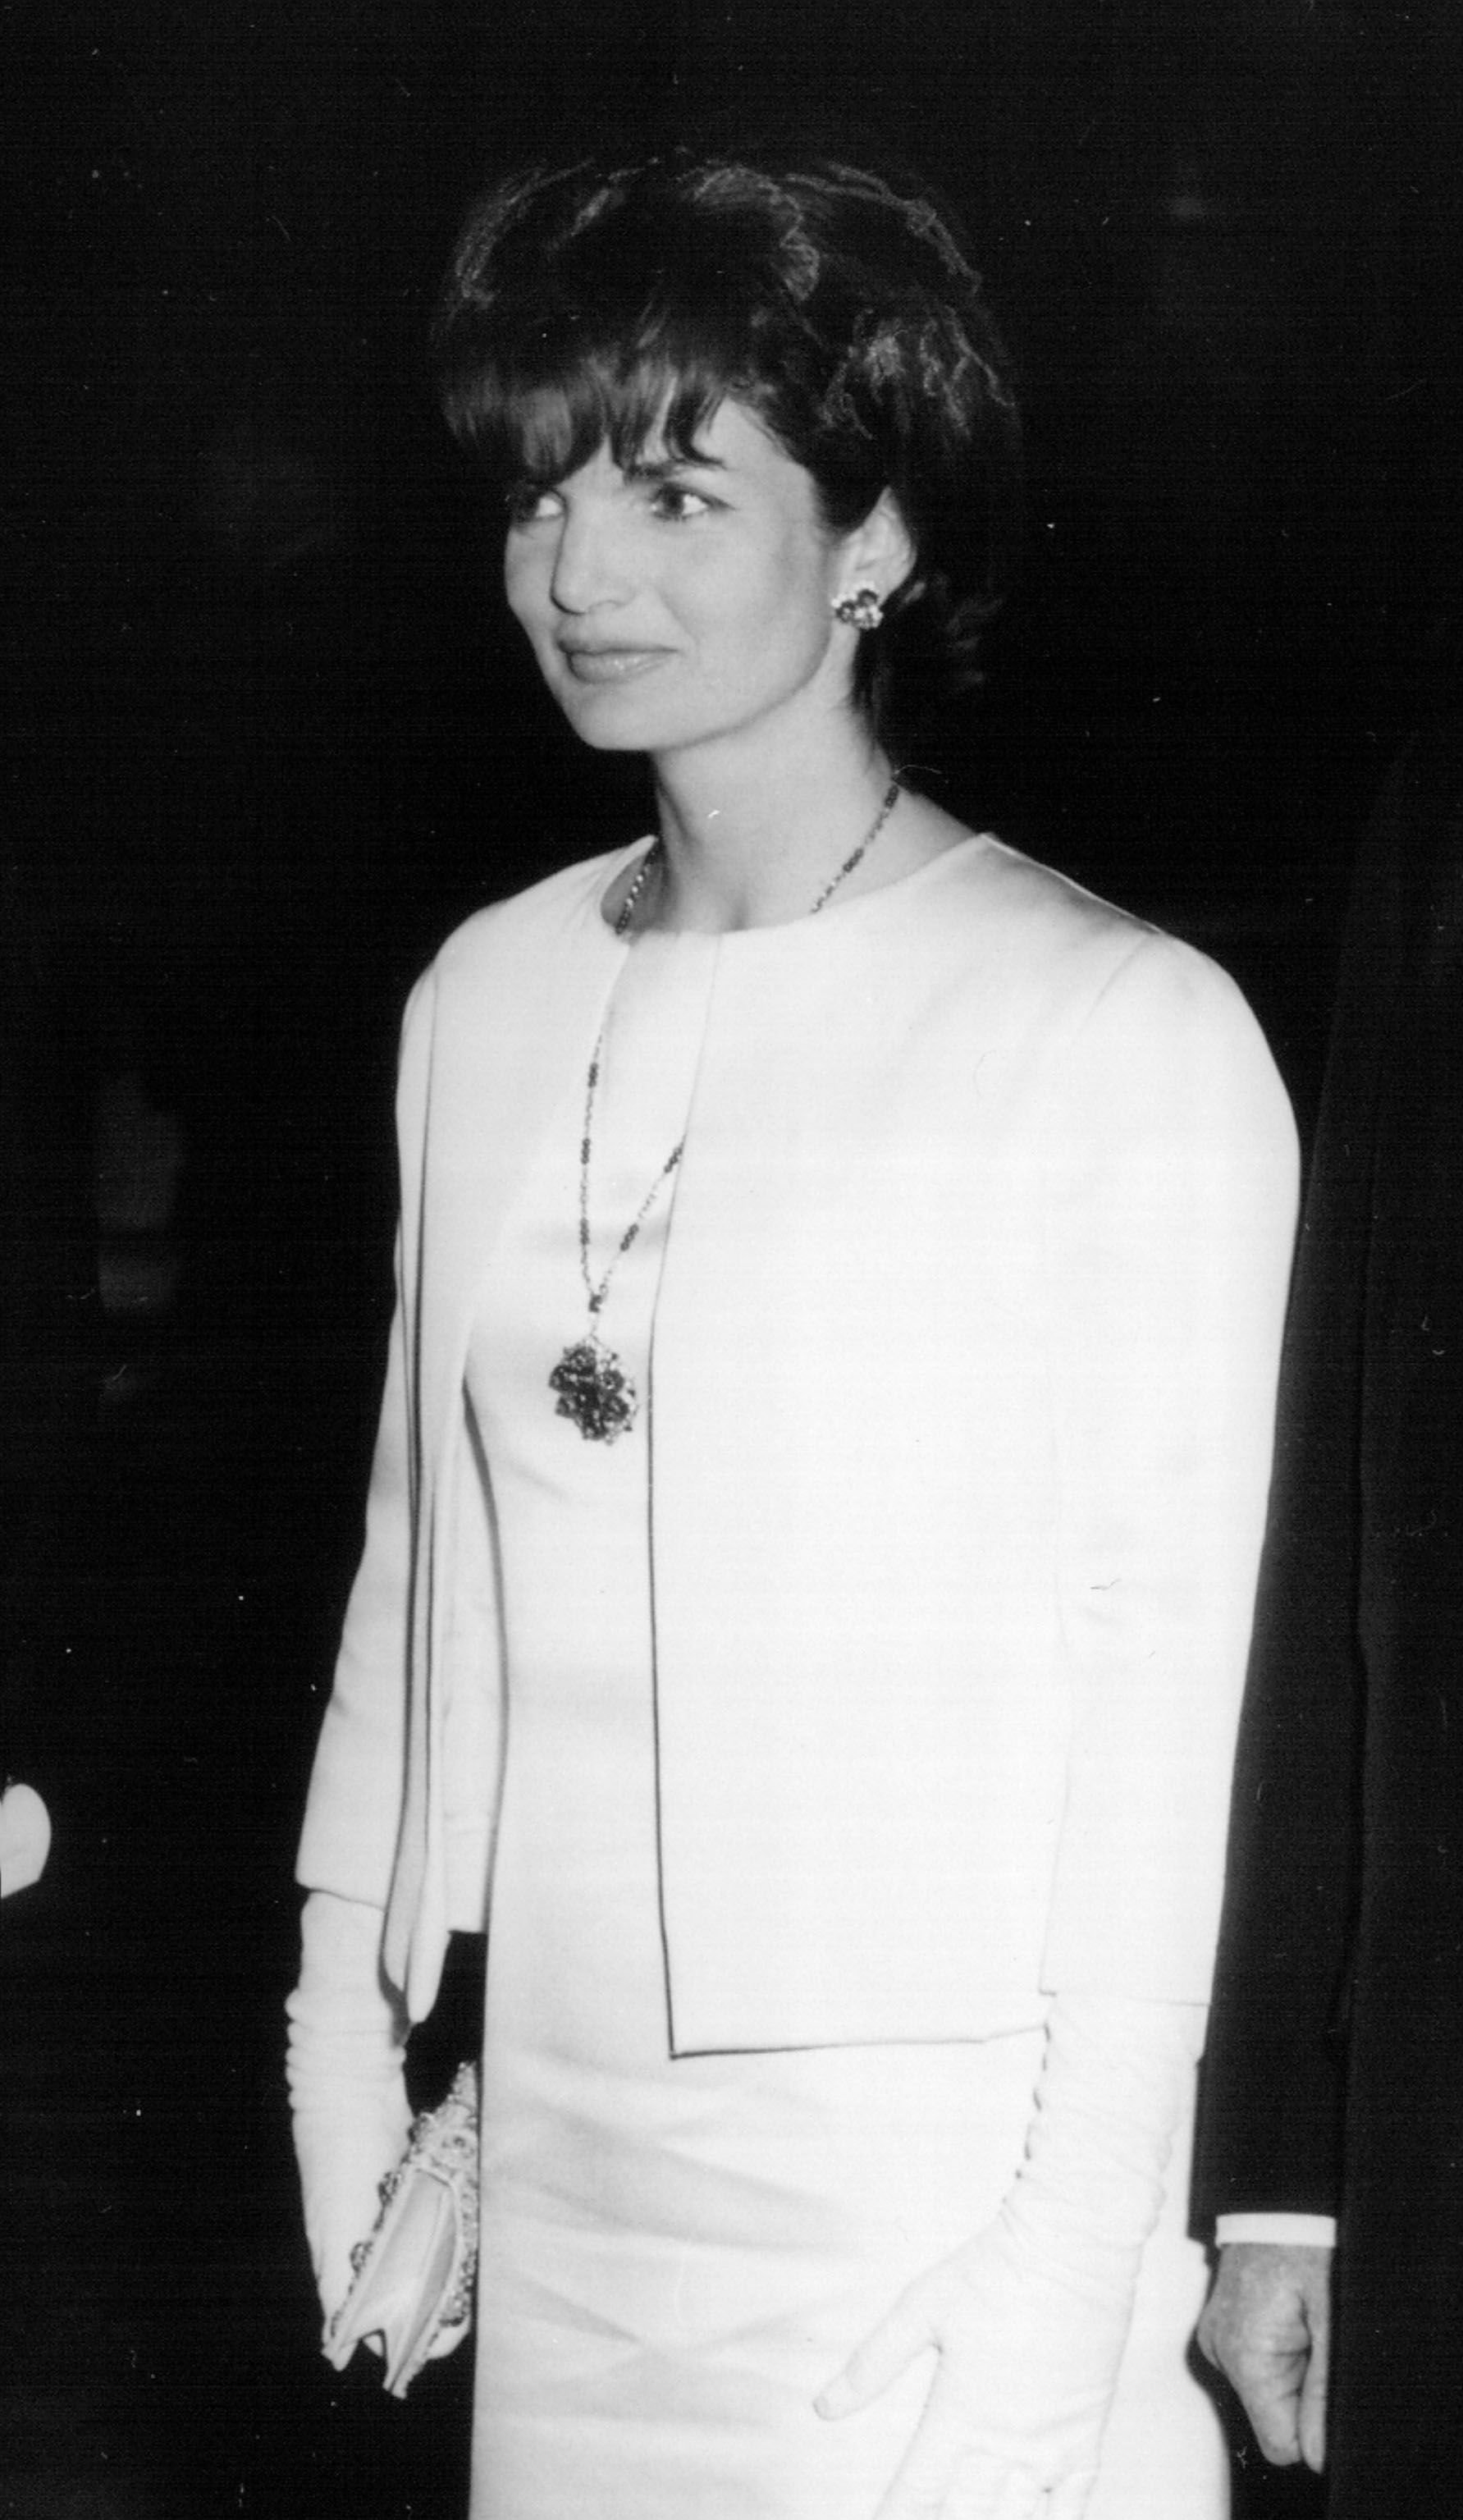 First Lady Jackie Kennedy at a White House Ceremony on December 6, 1962, in Washington, DC. | Source: National Archive/Newsmakers/Getty Images